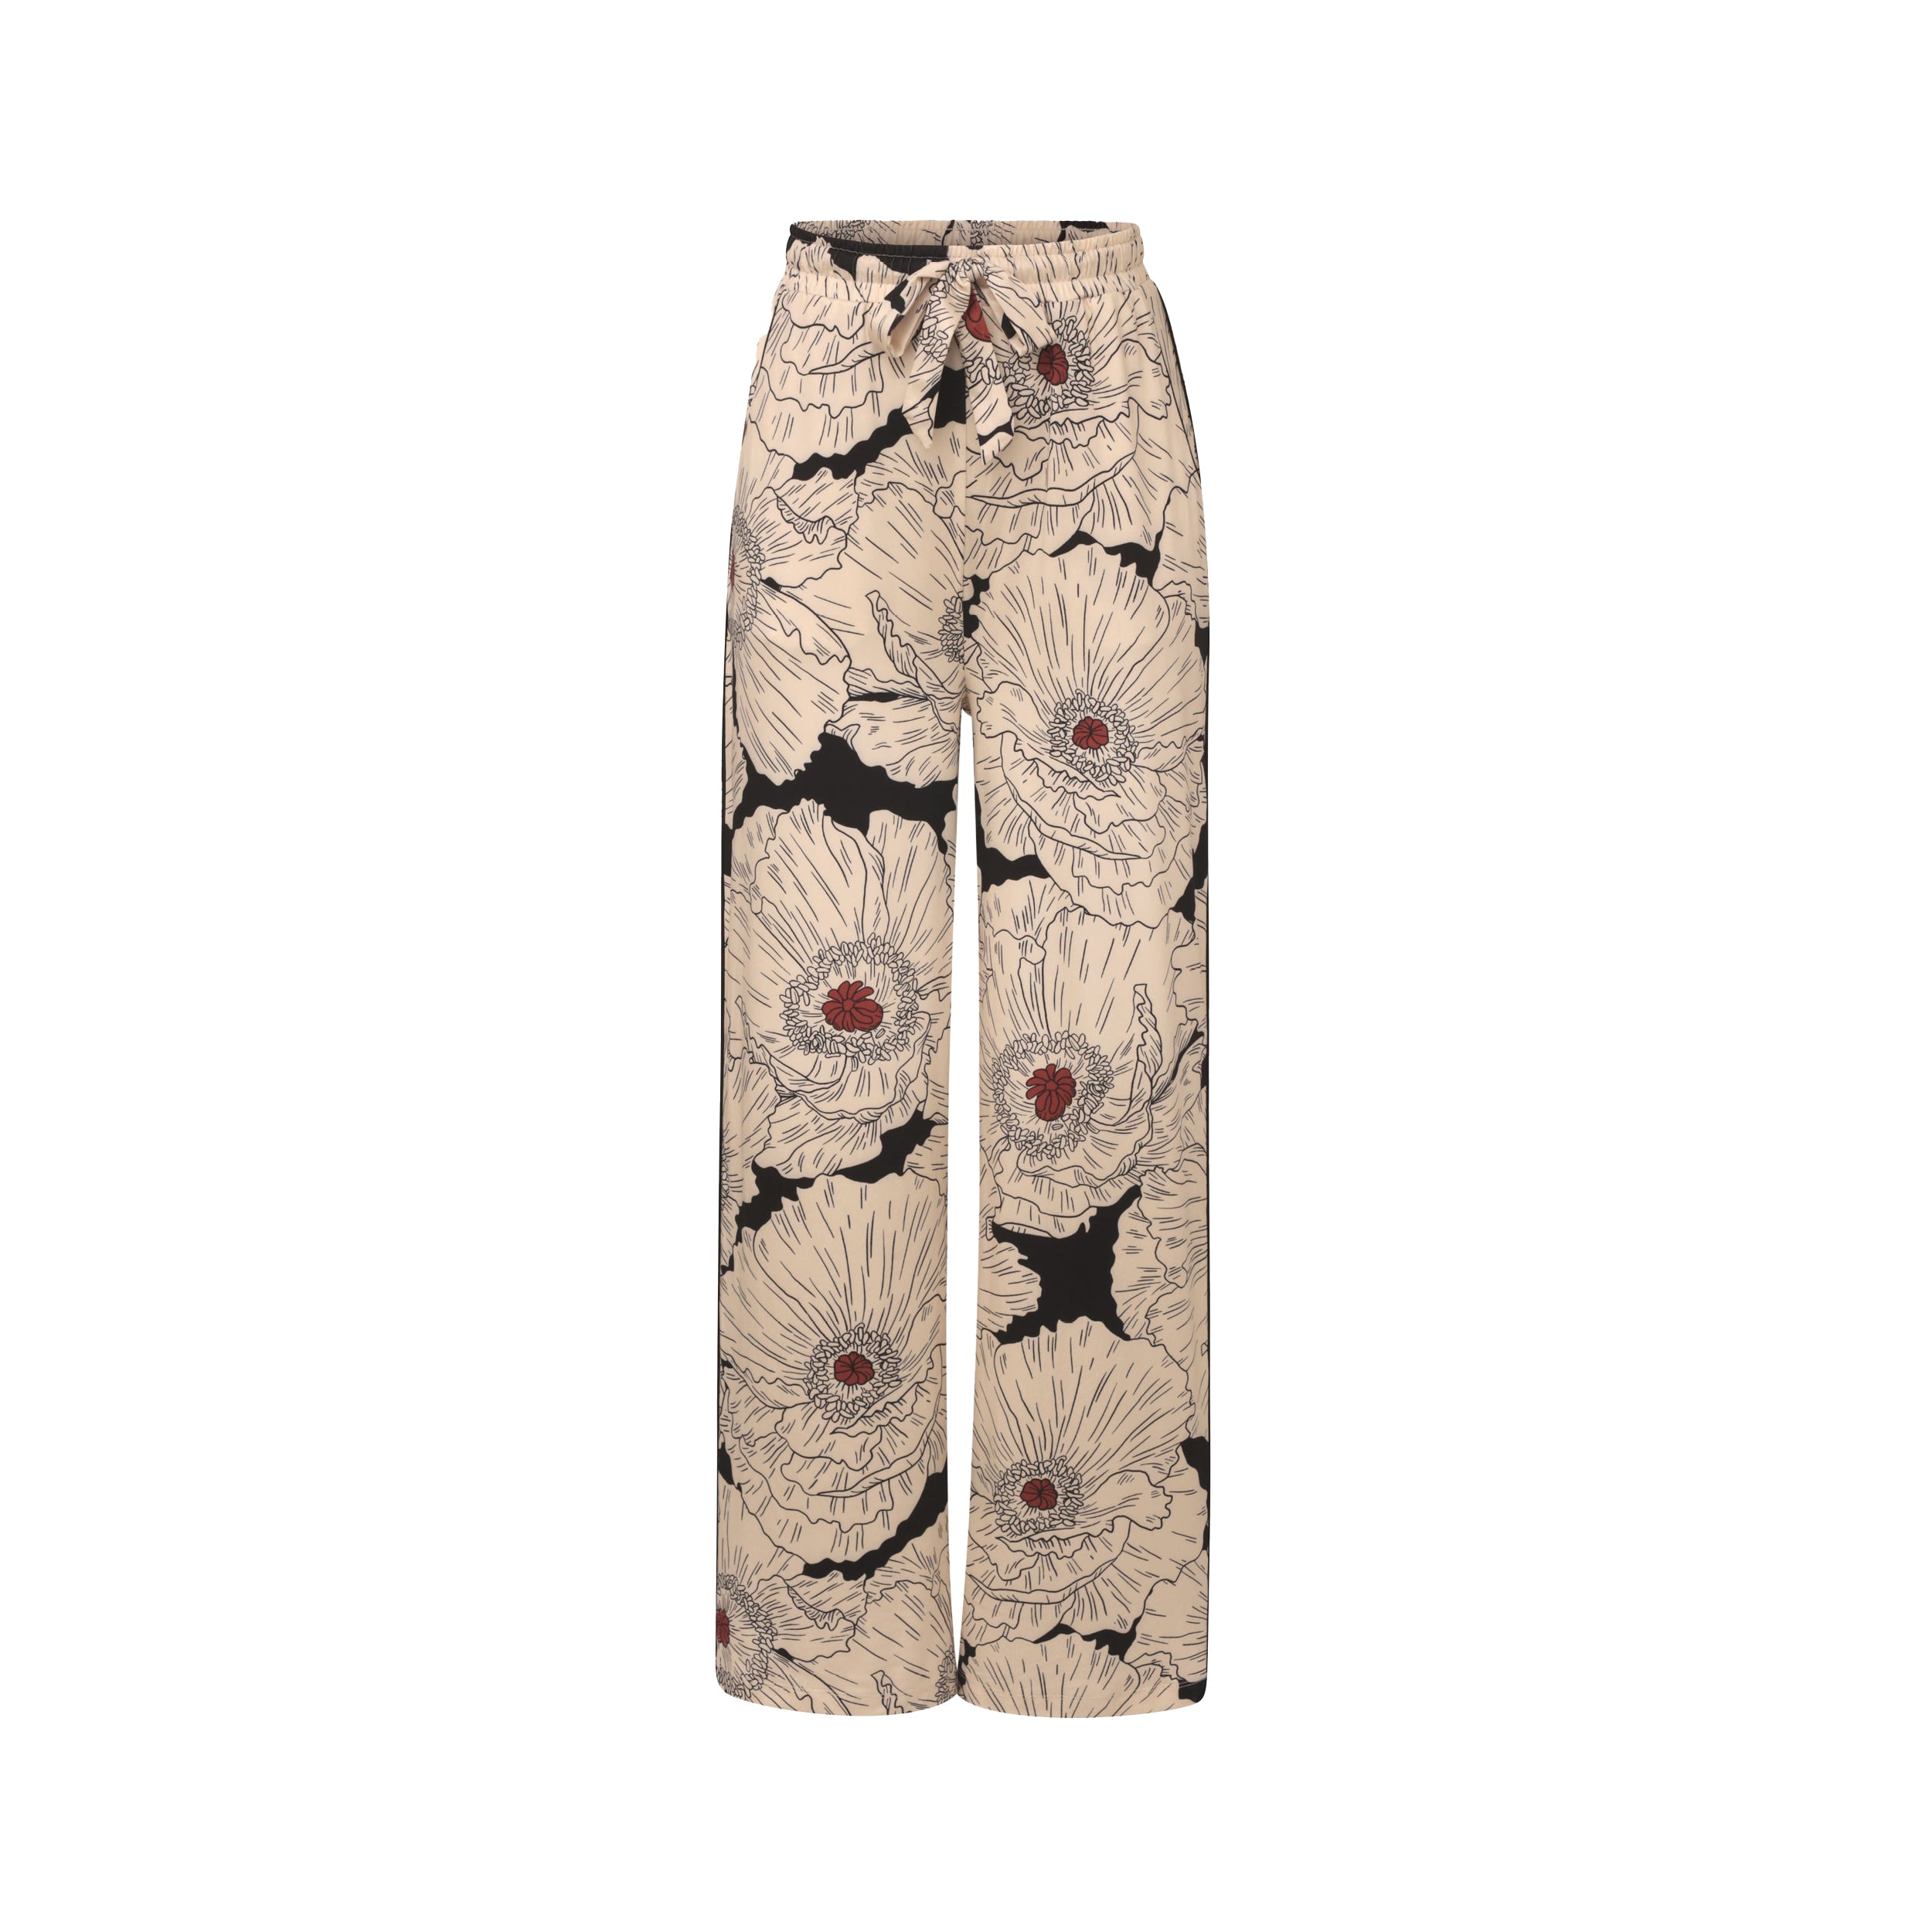 Product view of breathable, relaxed and buttery smooth pajama pant featuring high-waist cut, side pockets, front tie and stunning Poppy floral print.